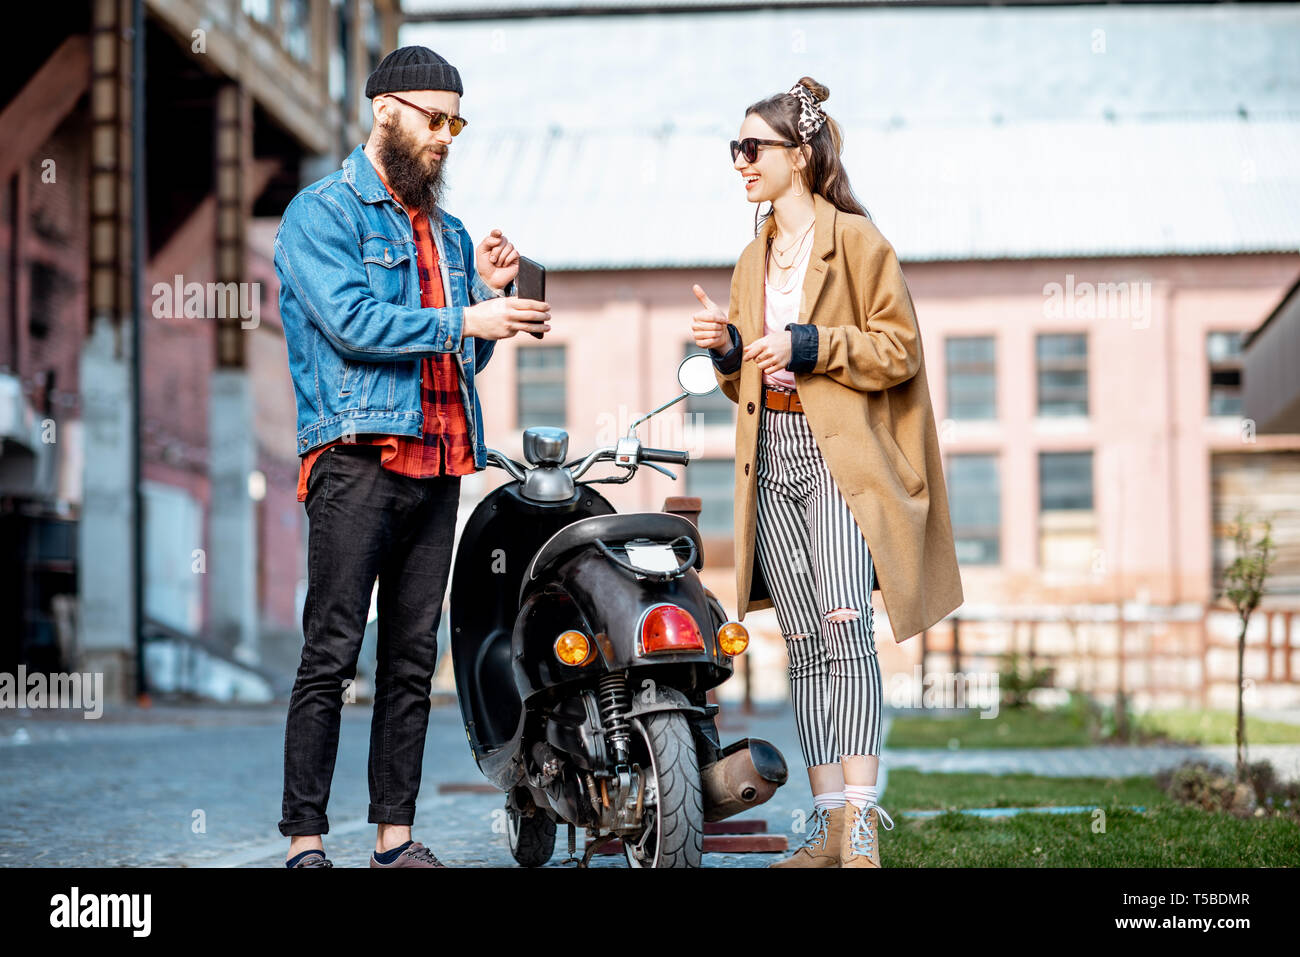 Stylish young man and woman talking together, standing near the retro moped outdoors on the industrial urban background Stock Photo